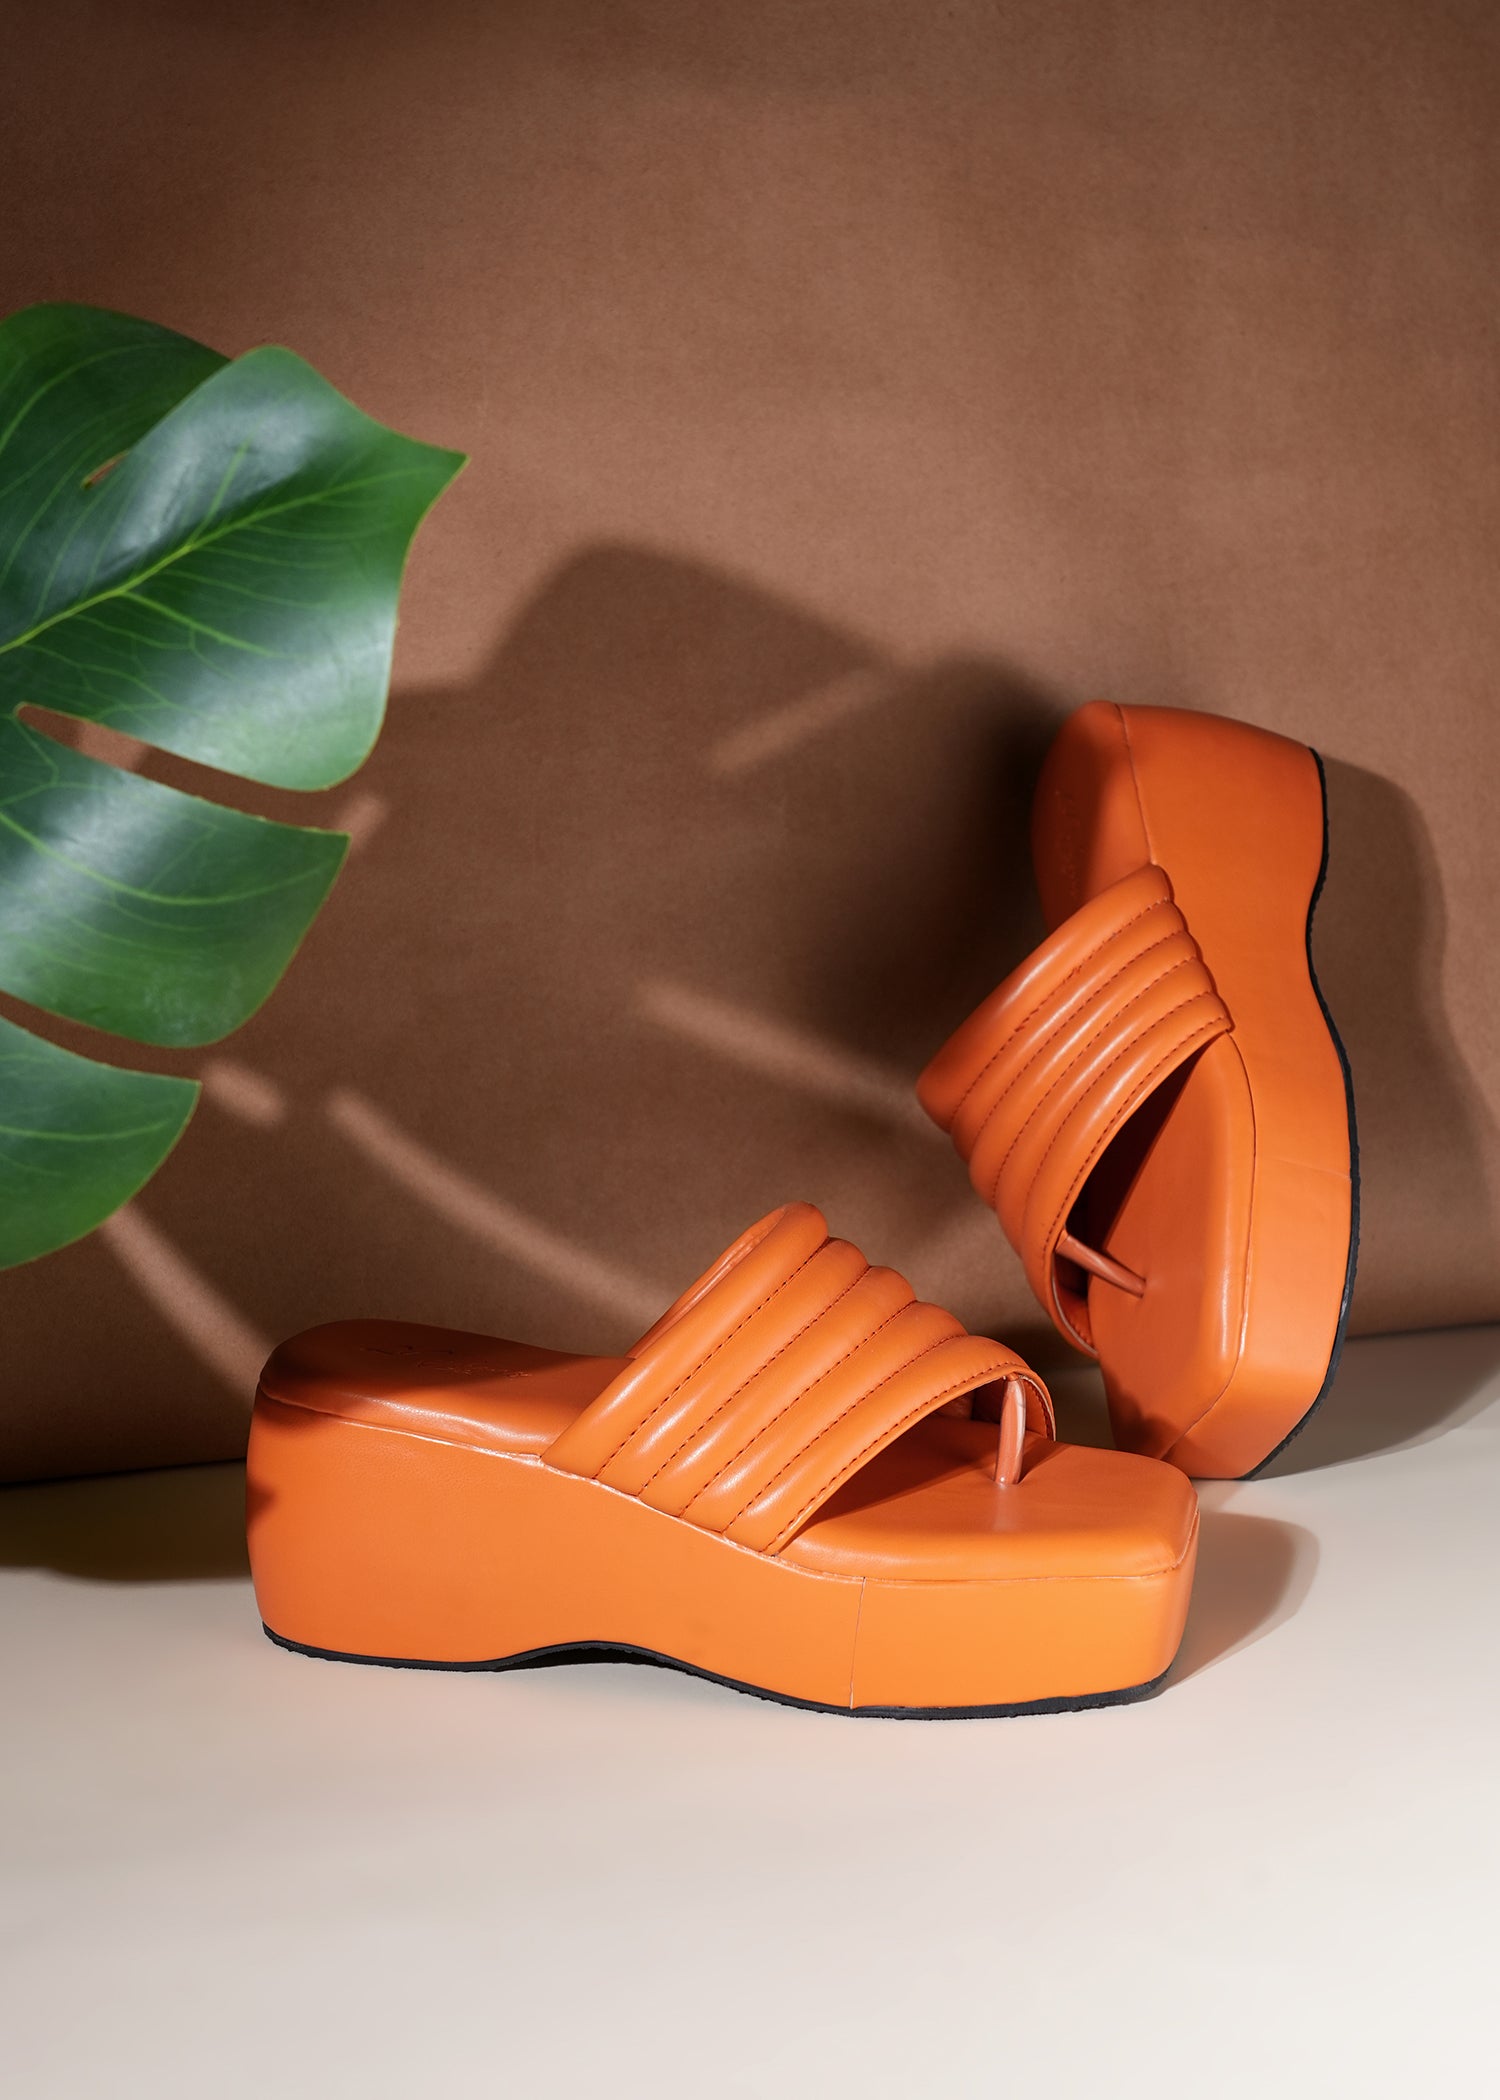 ▷ Women's online heeled shoes - Made in Spain - Shop online